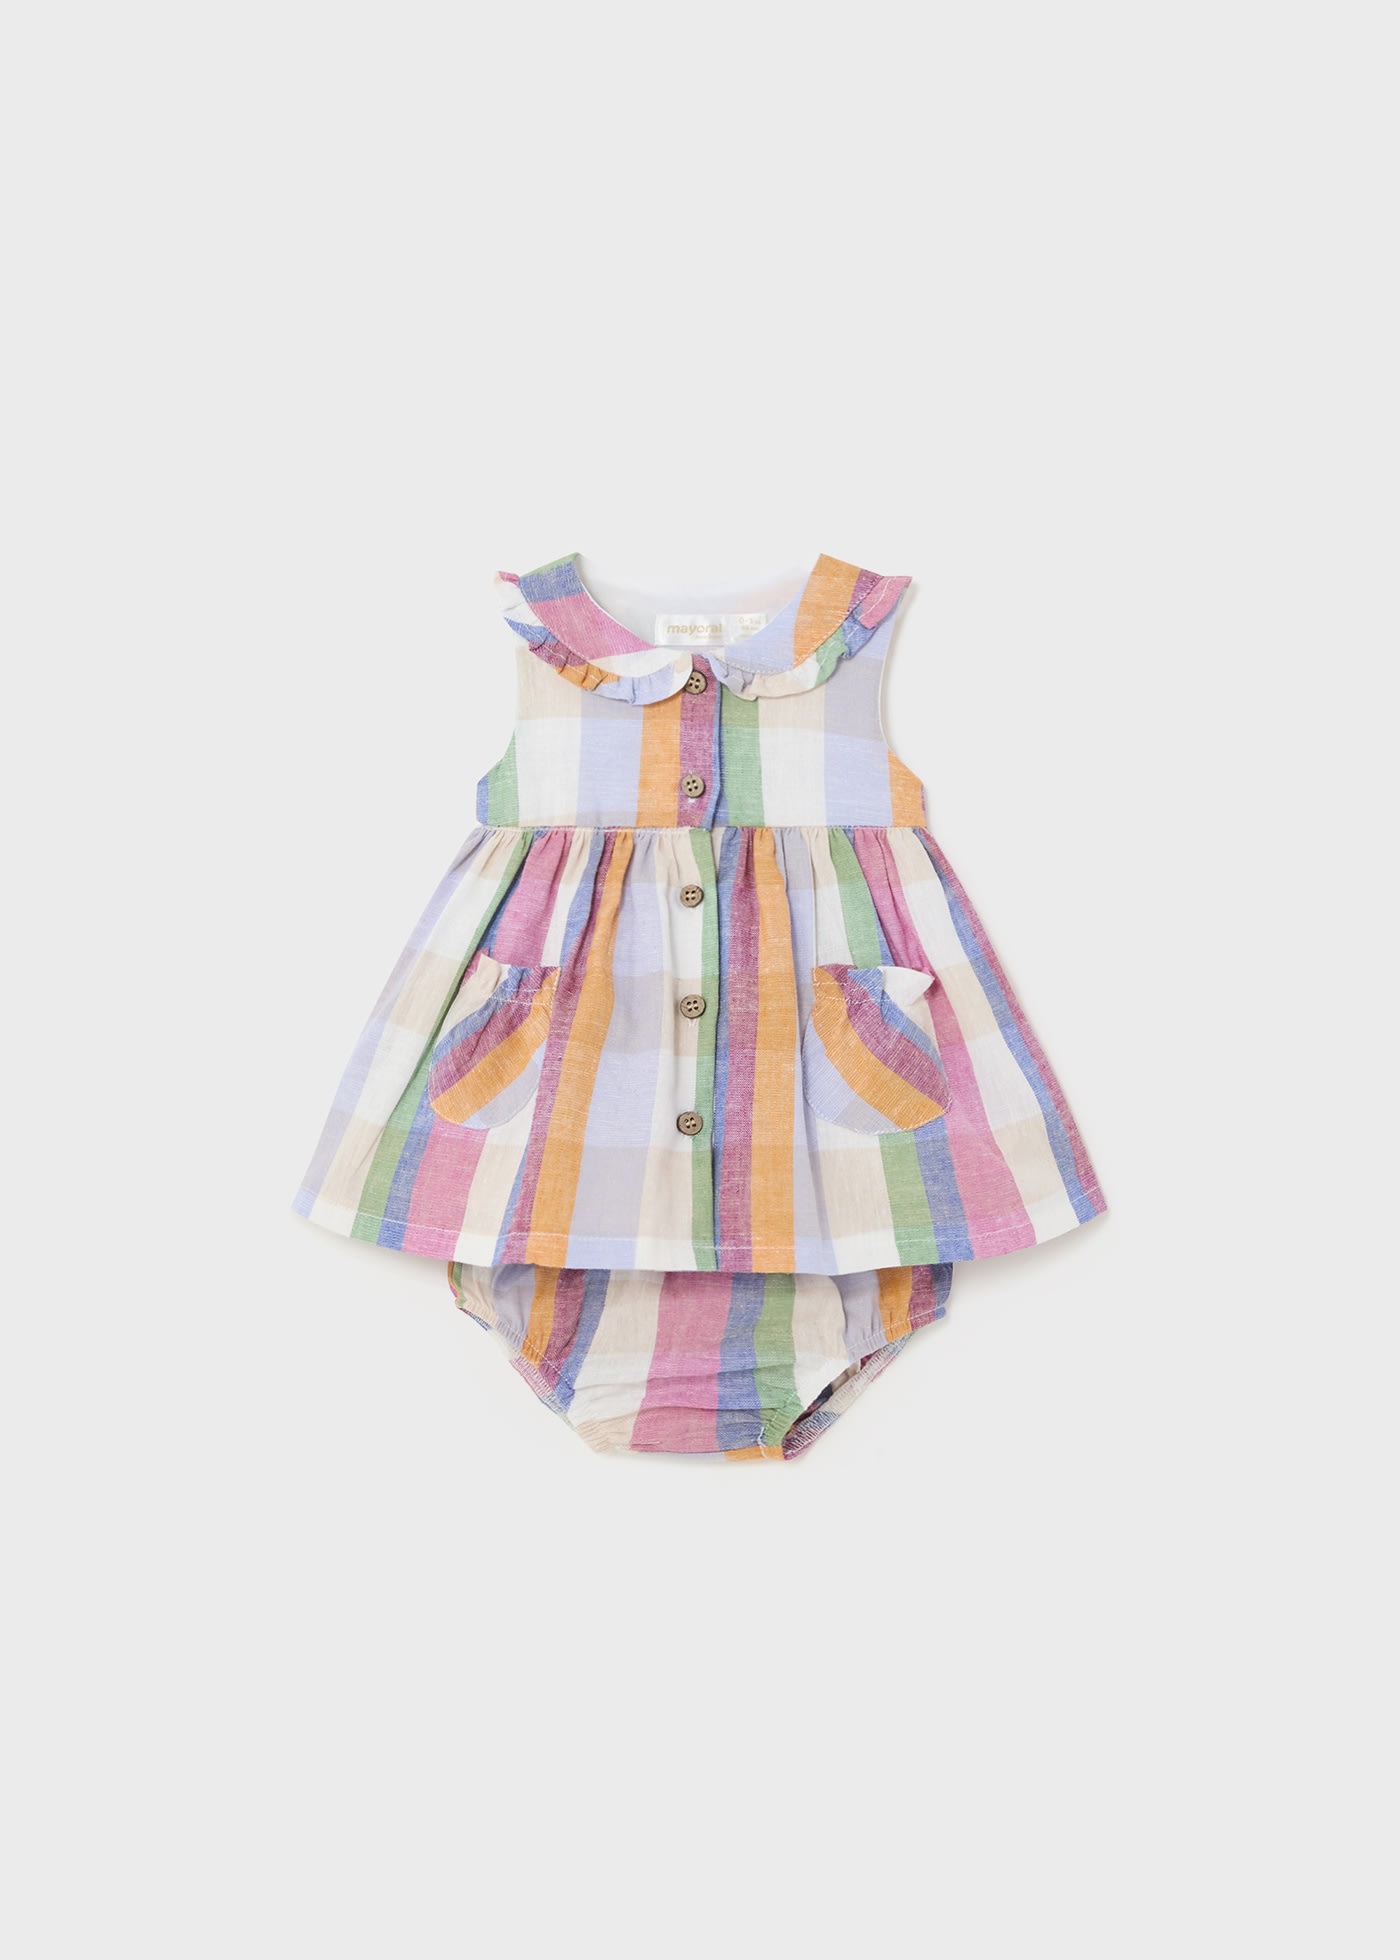 Newborn Gingham Dress with Nappy Cover Better Cotton